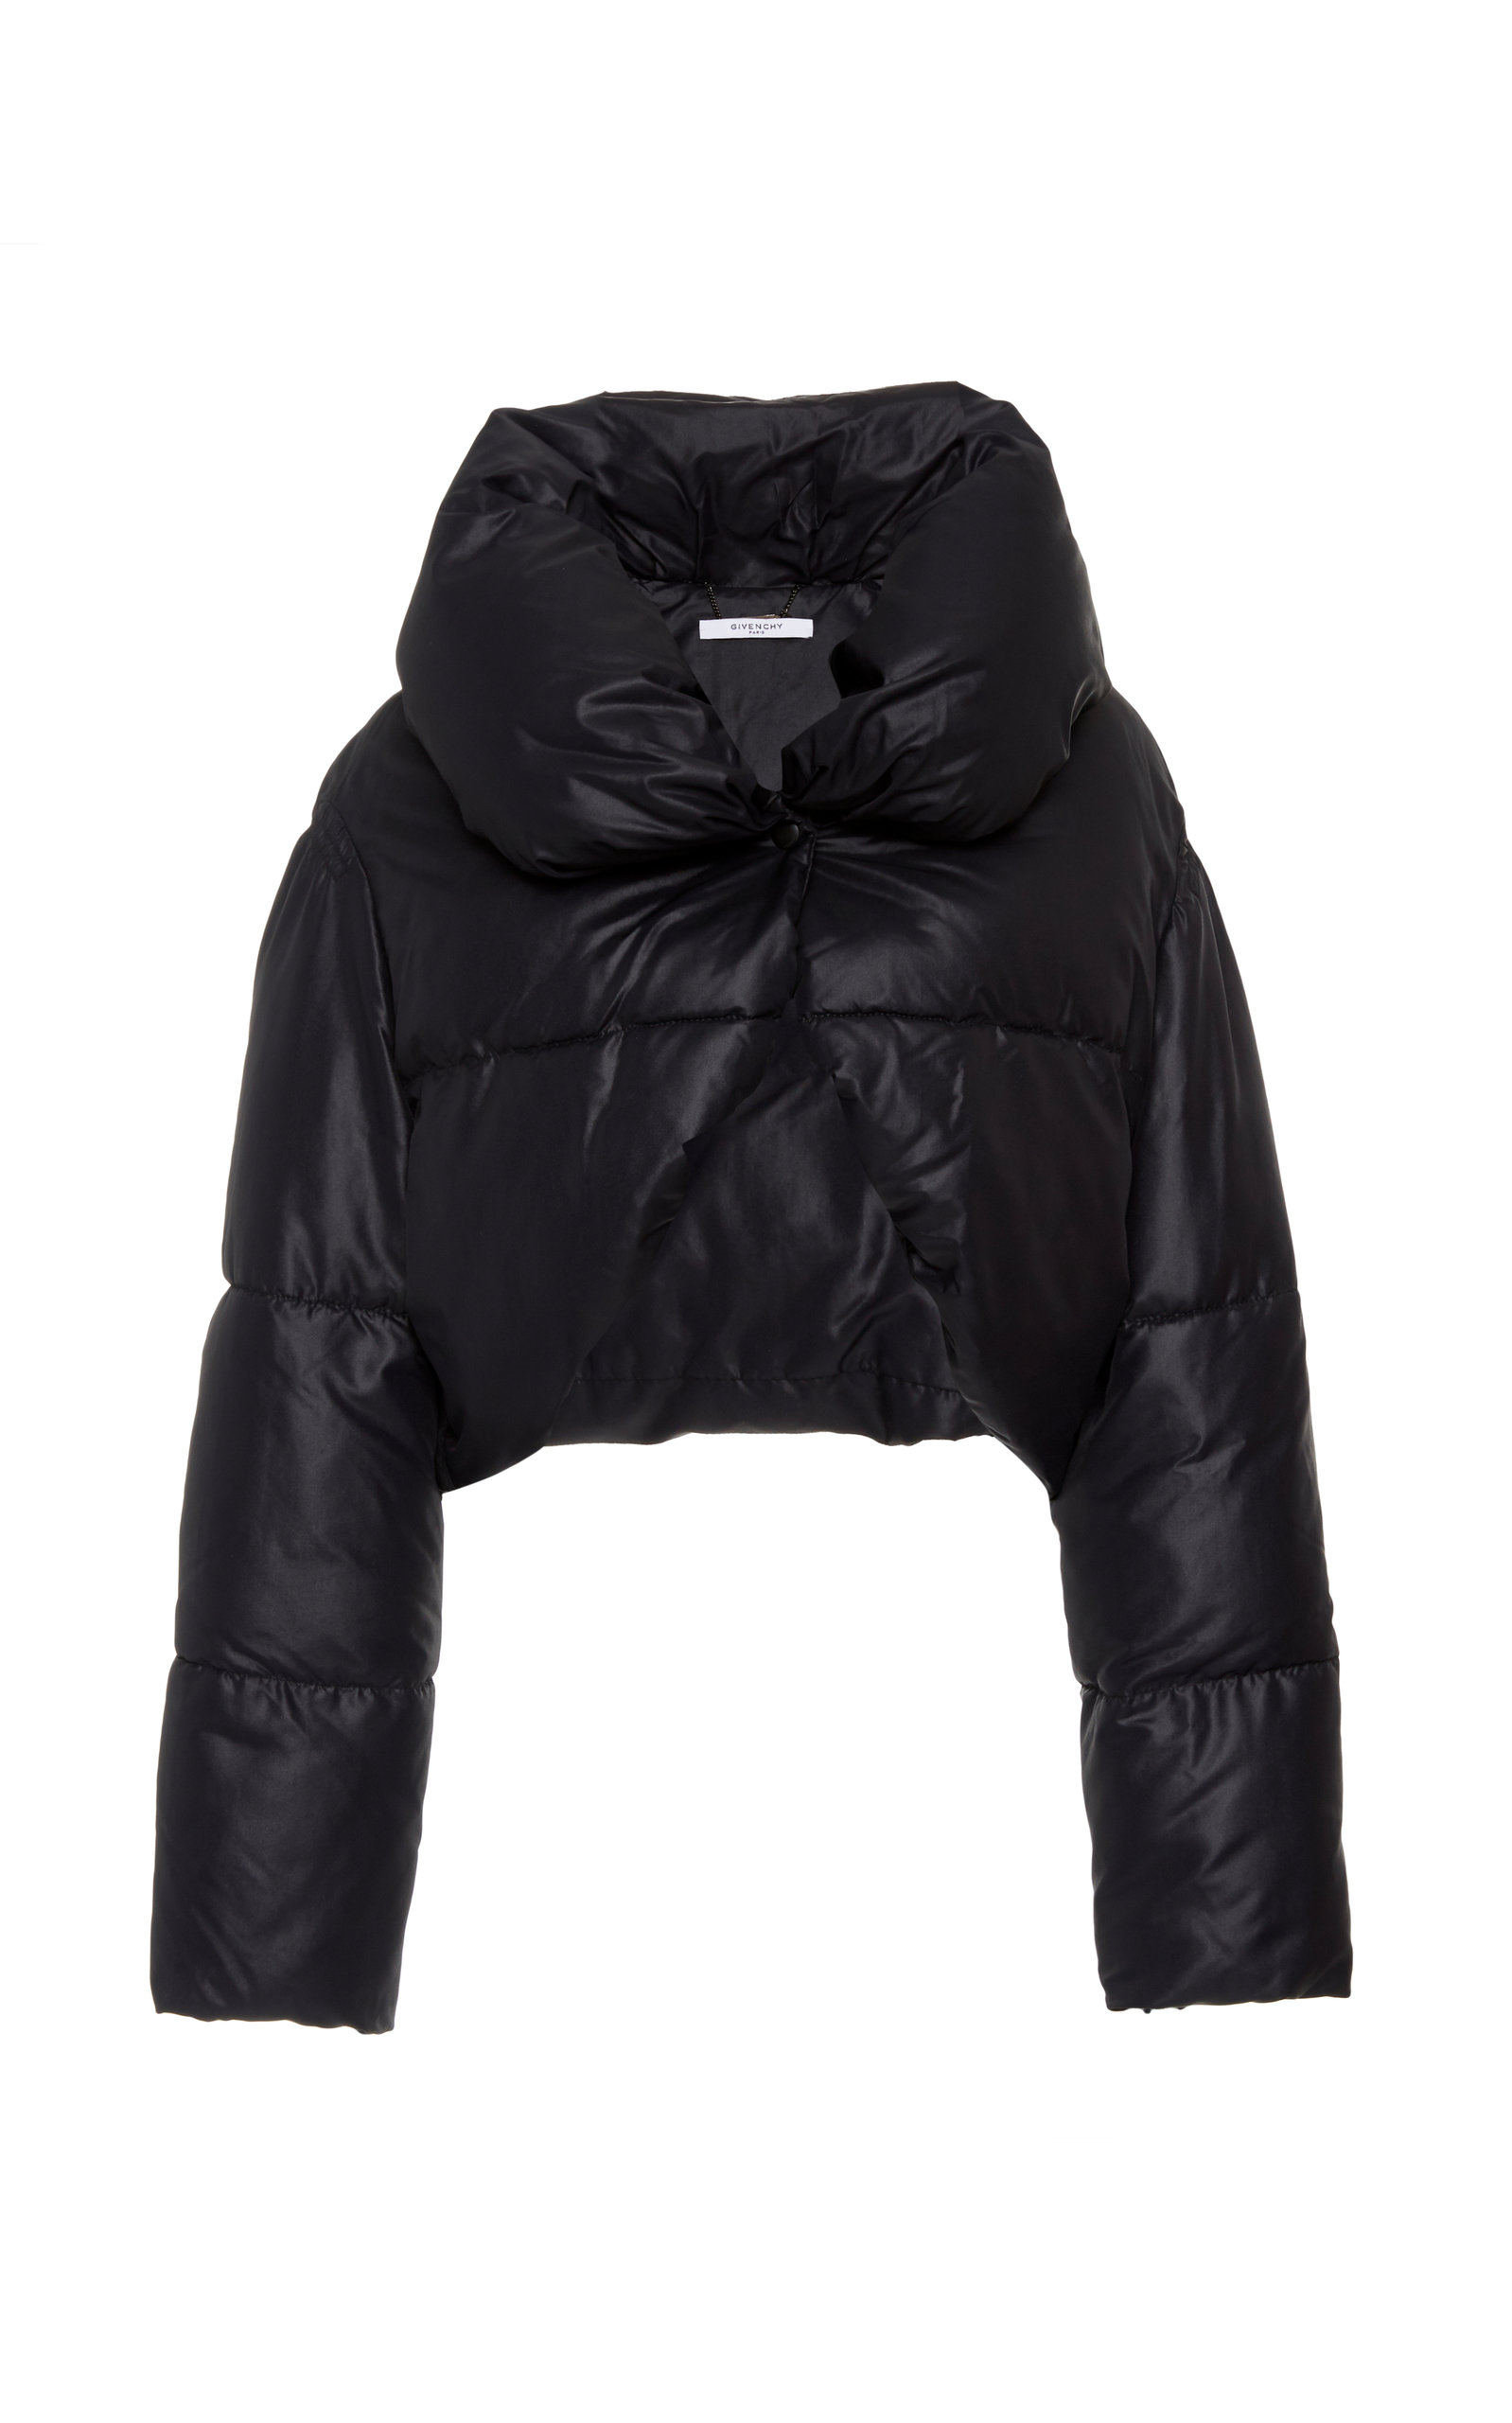 Givenchy Puffer Jacket Online, 58% OFF | equipatetrailrunning.com